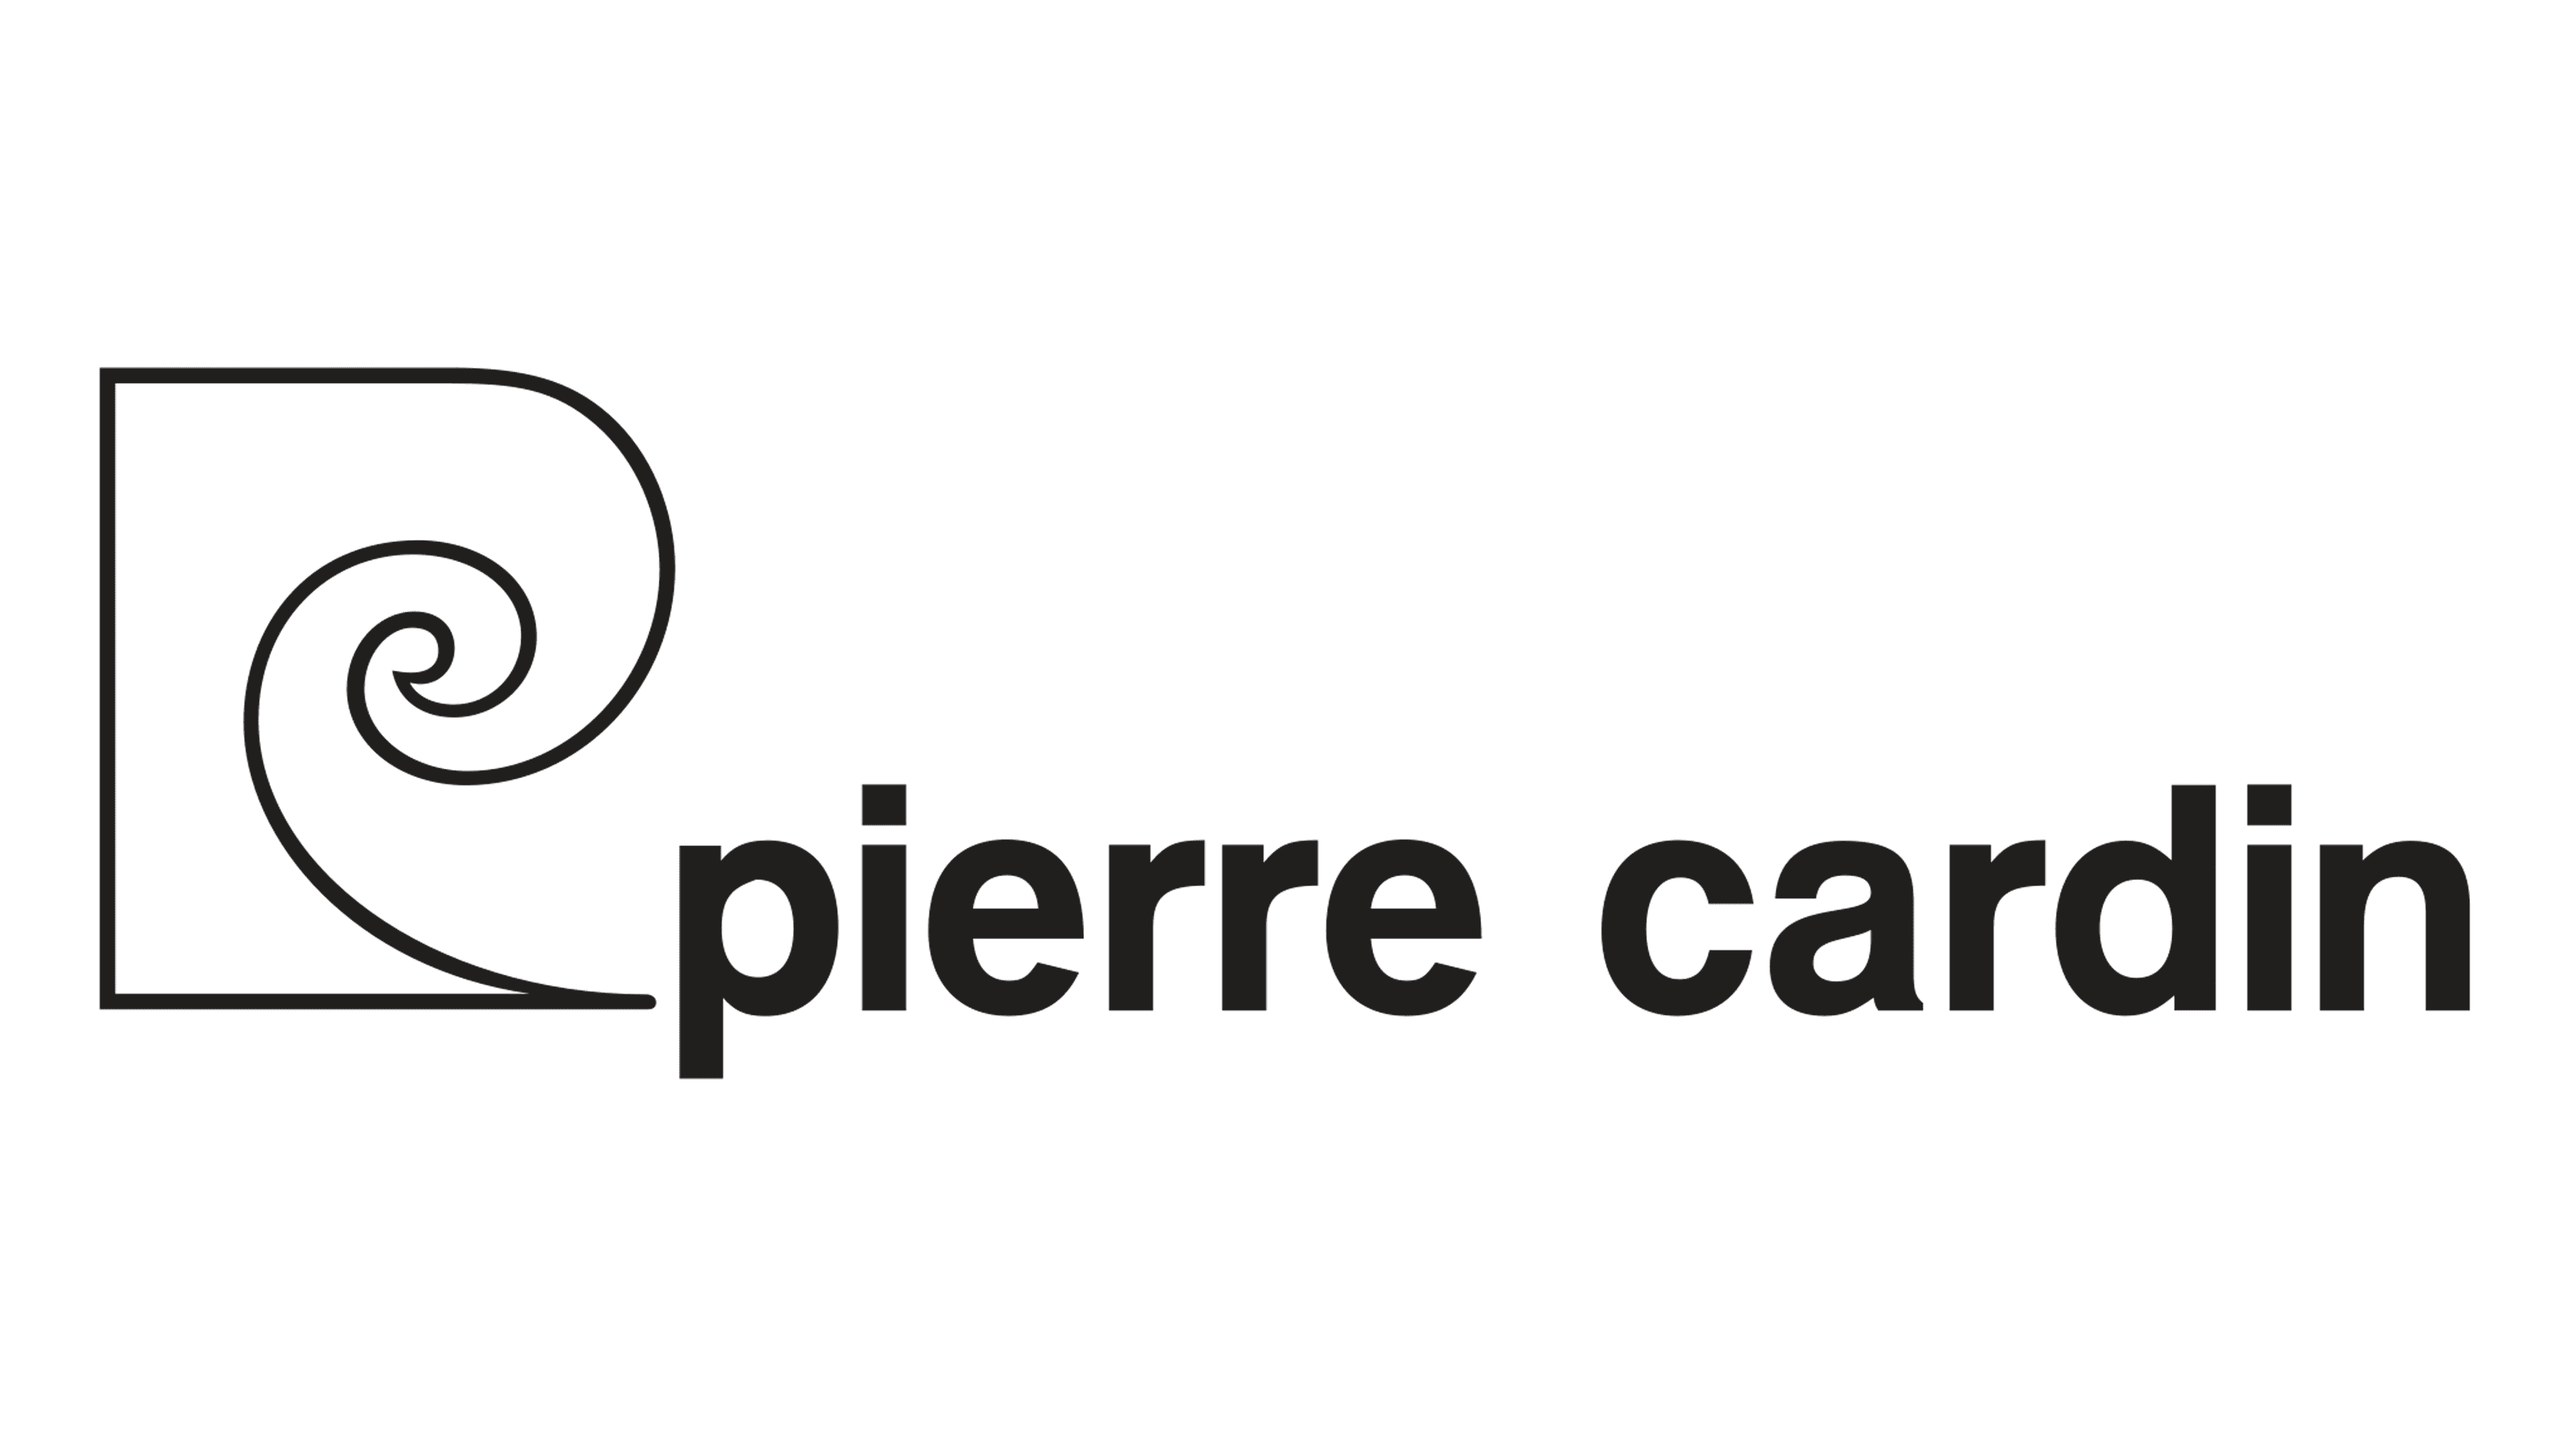 Pierre Cardin Logo and symbol, meaning, history, PNG, brand